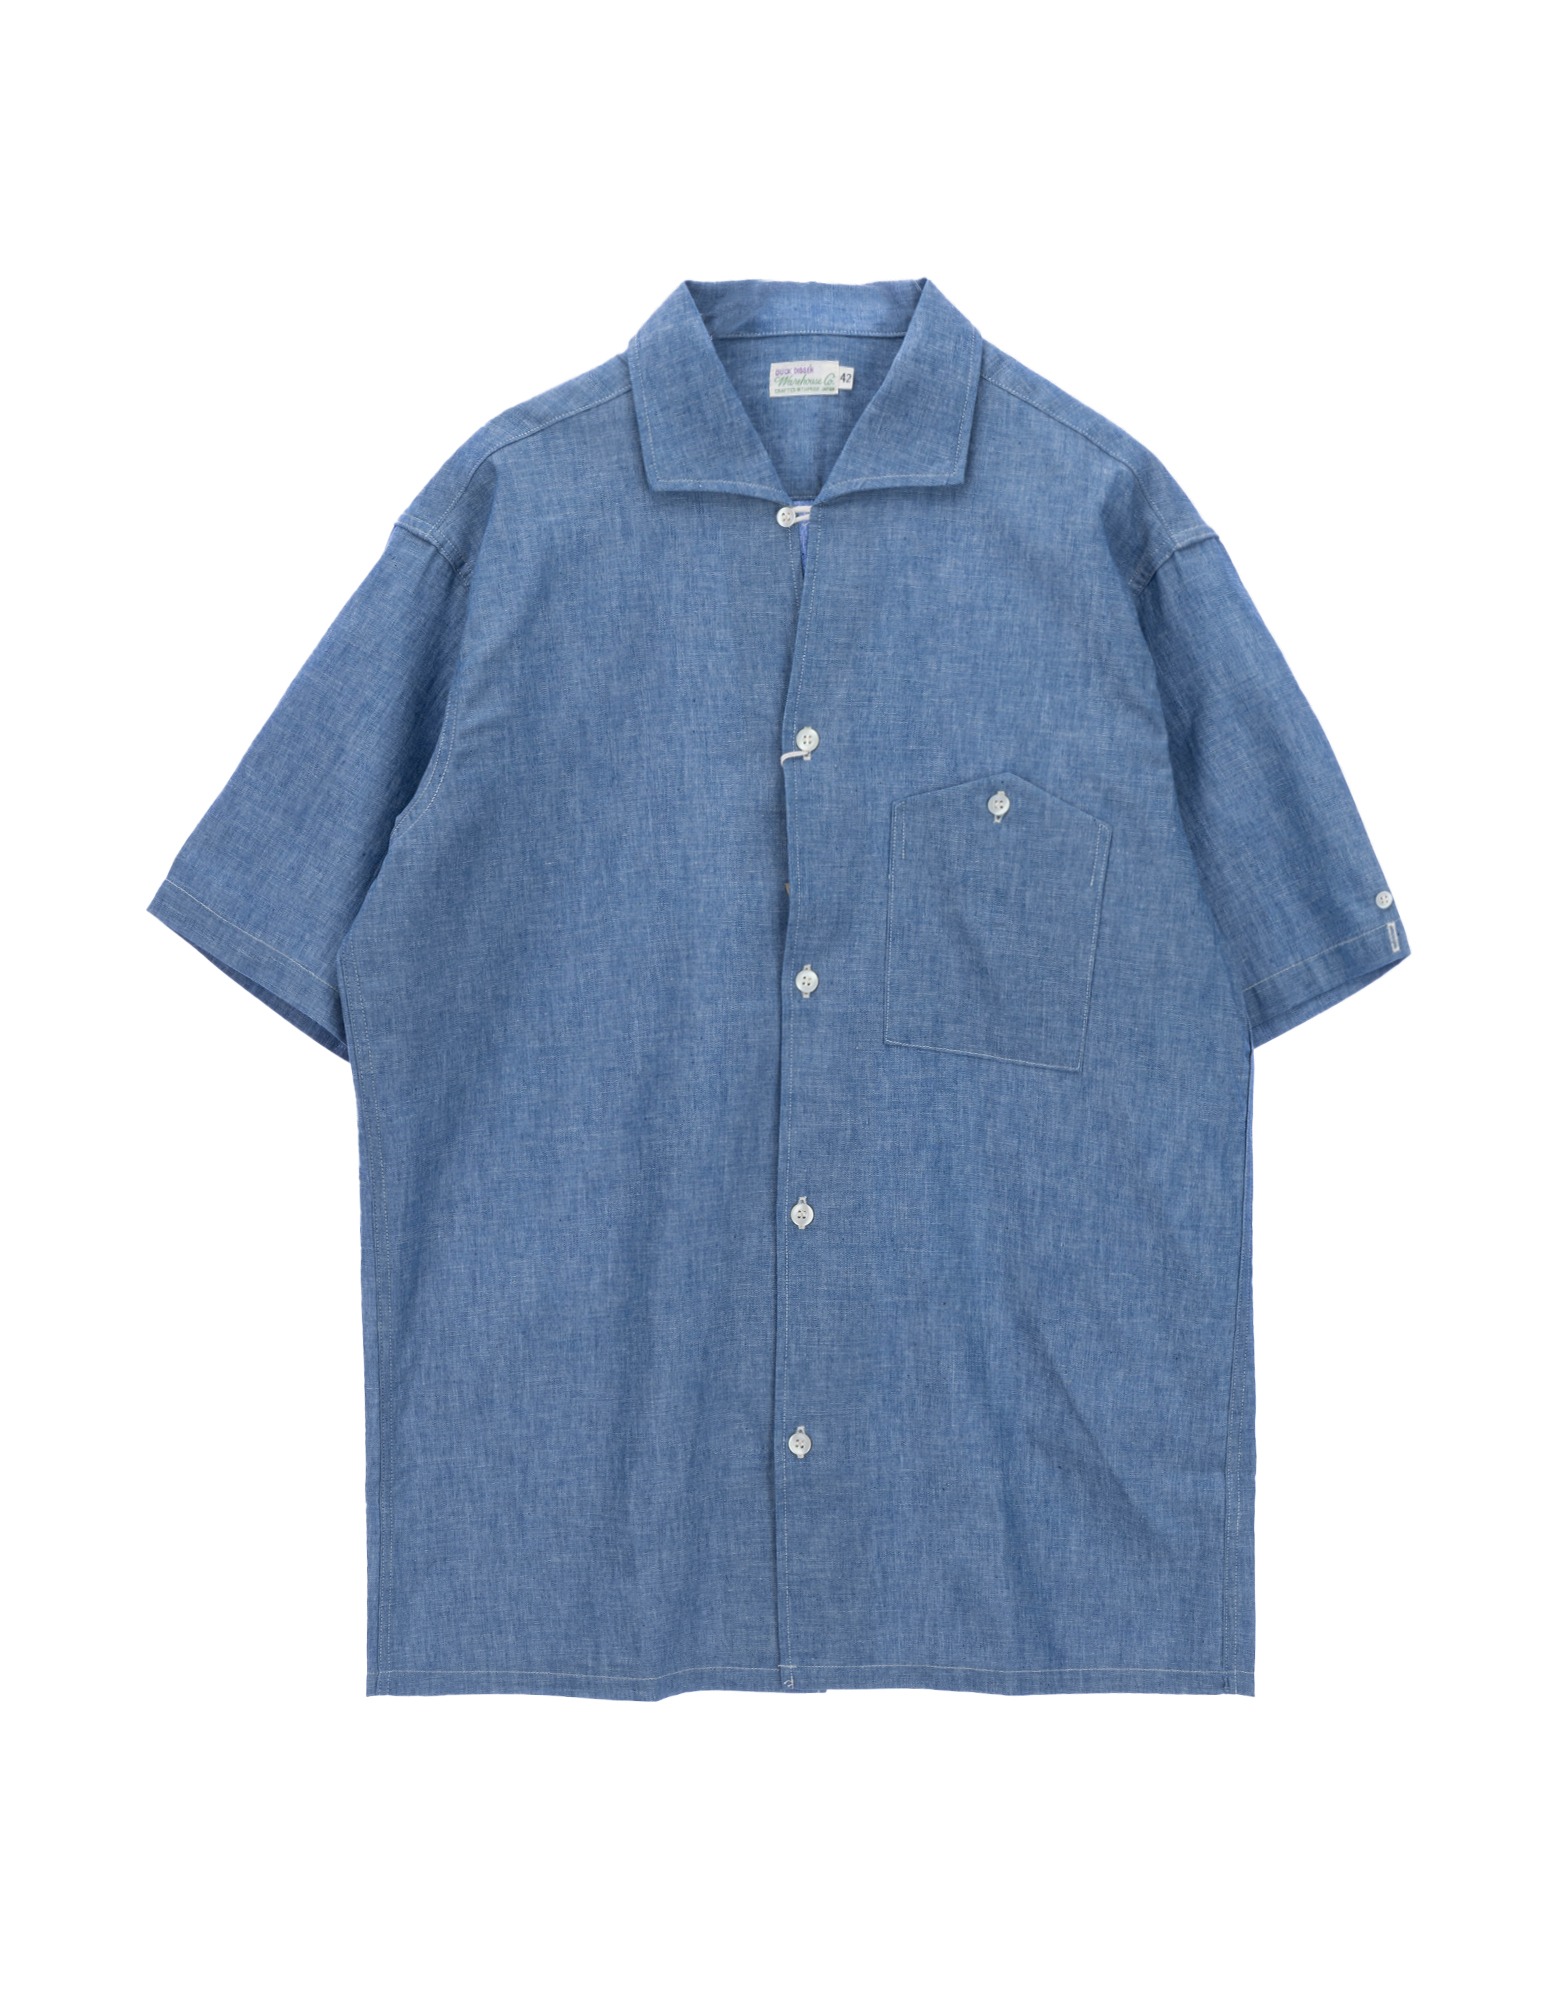 Lot 3091, S/S OPEN COLLAR SHIRTS (Blue Chambray)